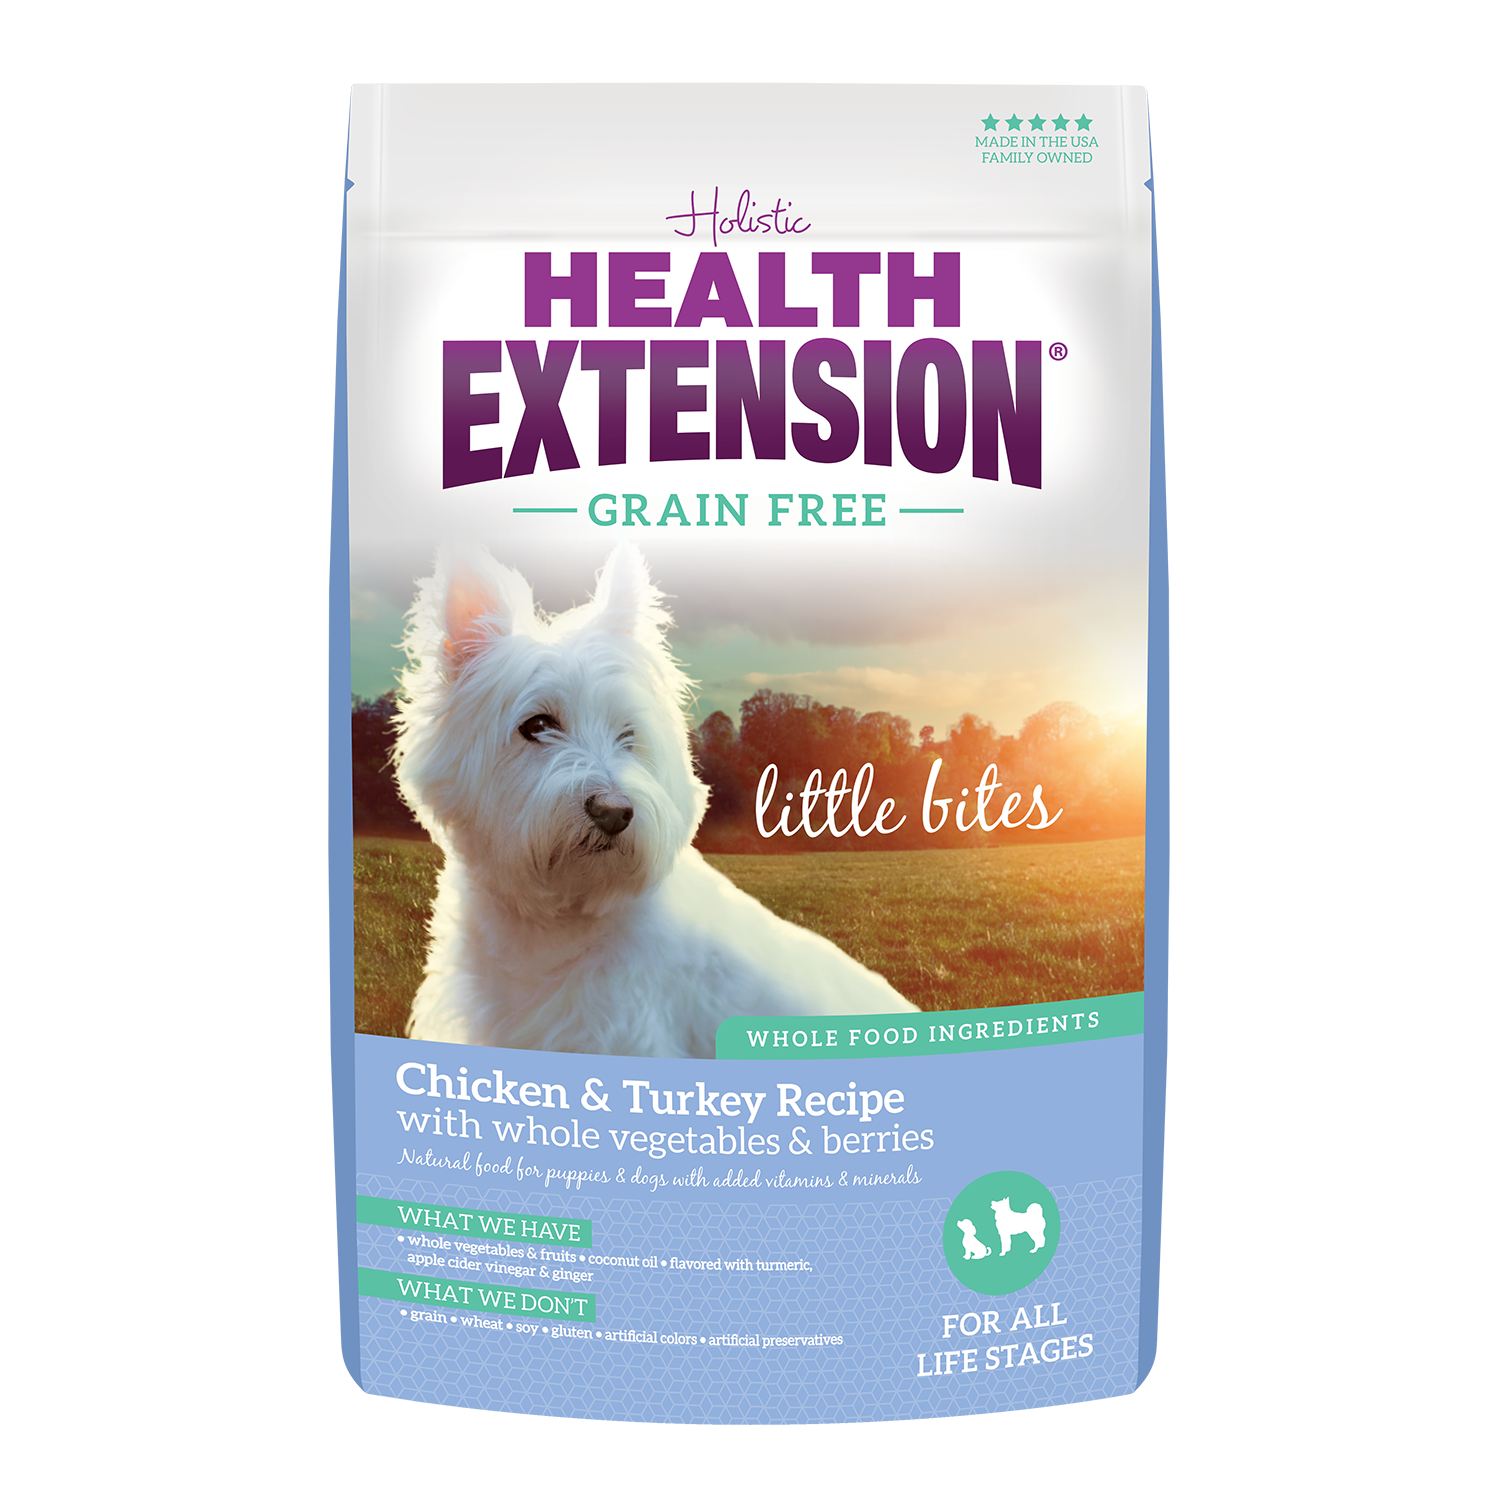 A package of Health Extension Grain Free Little Bites dog food with a chicken and turkey recipe, which includes whole vegetables and berries. 